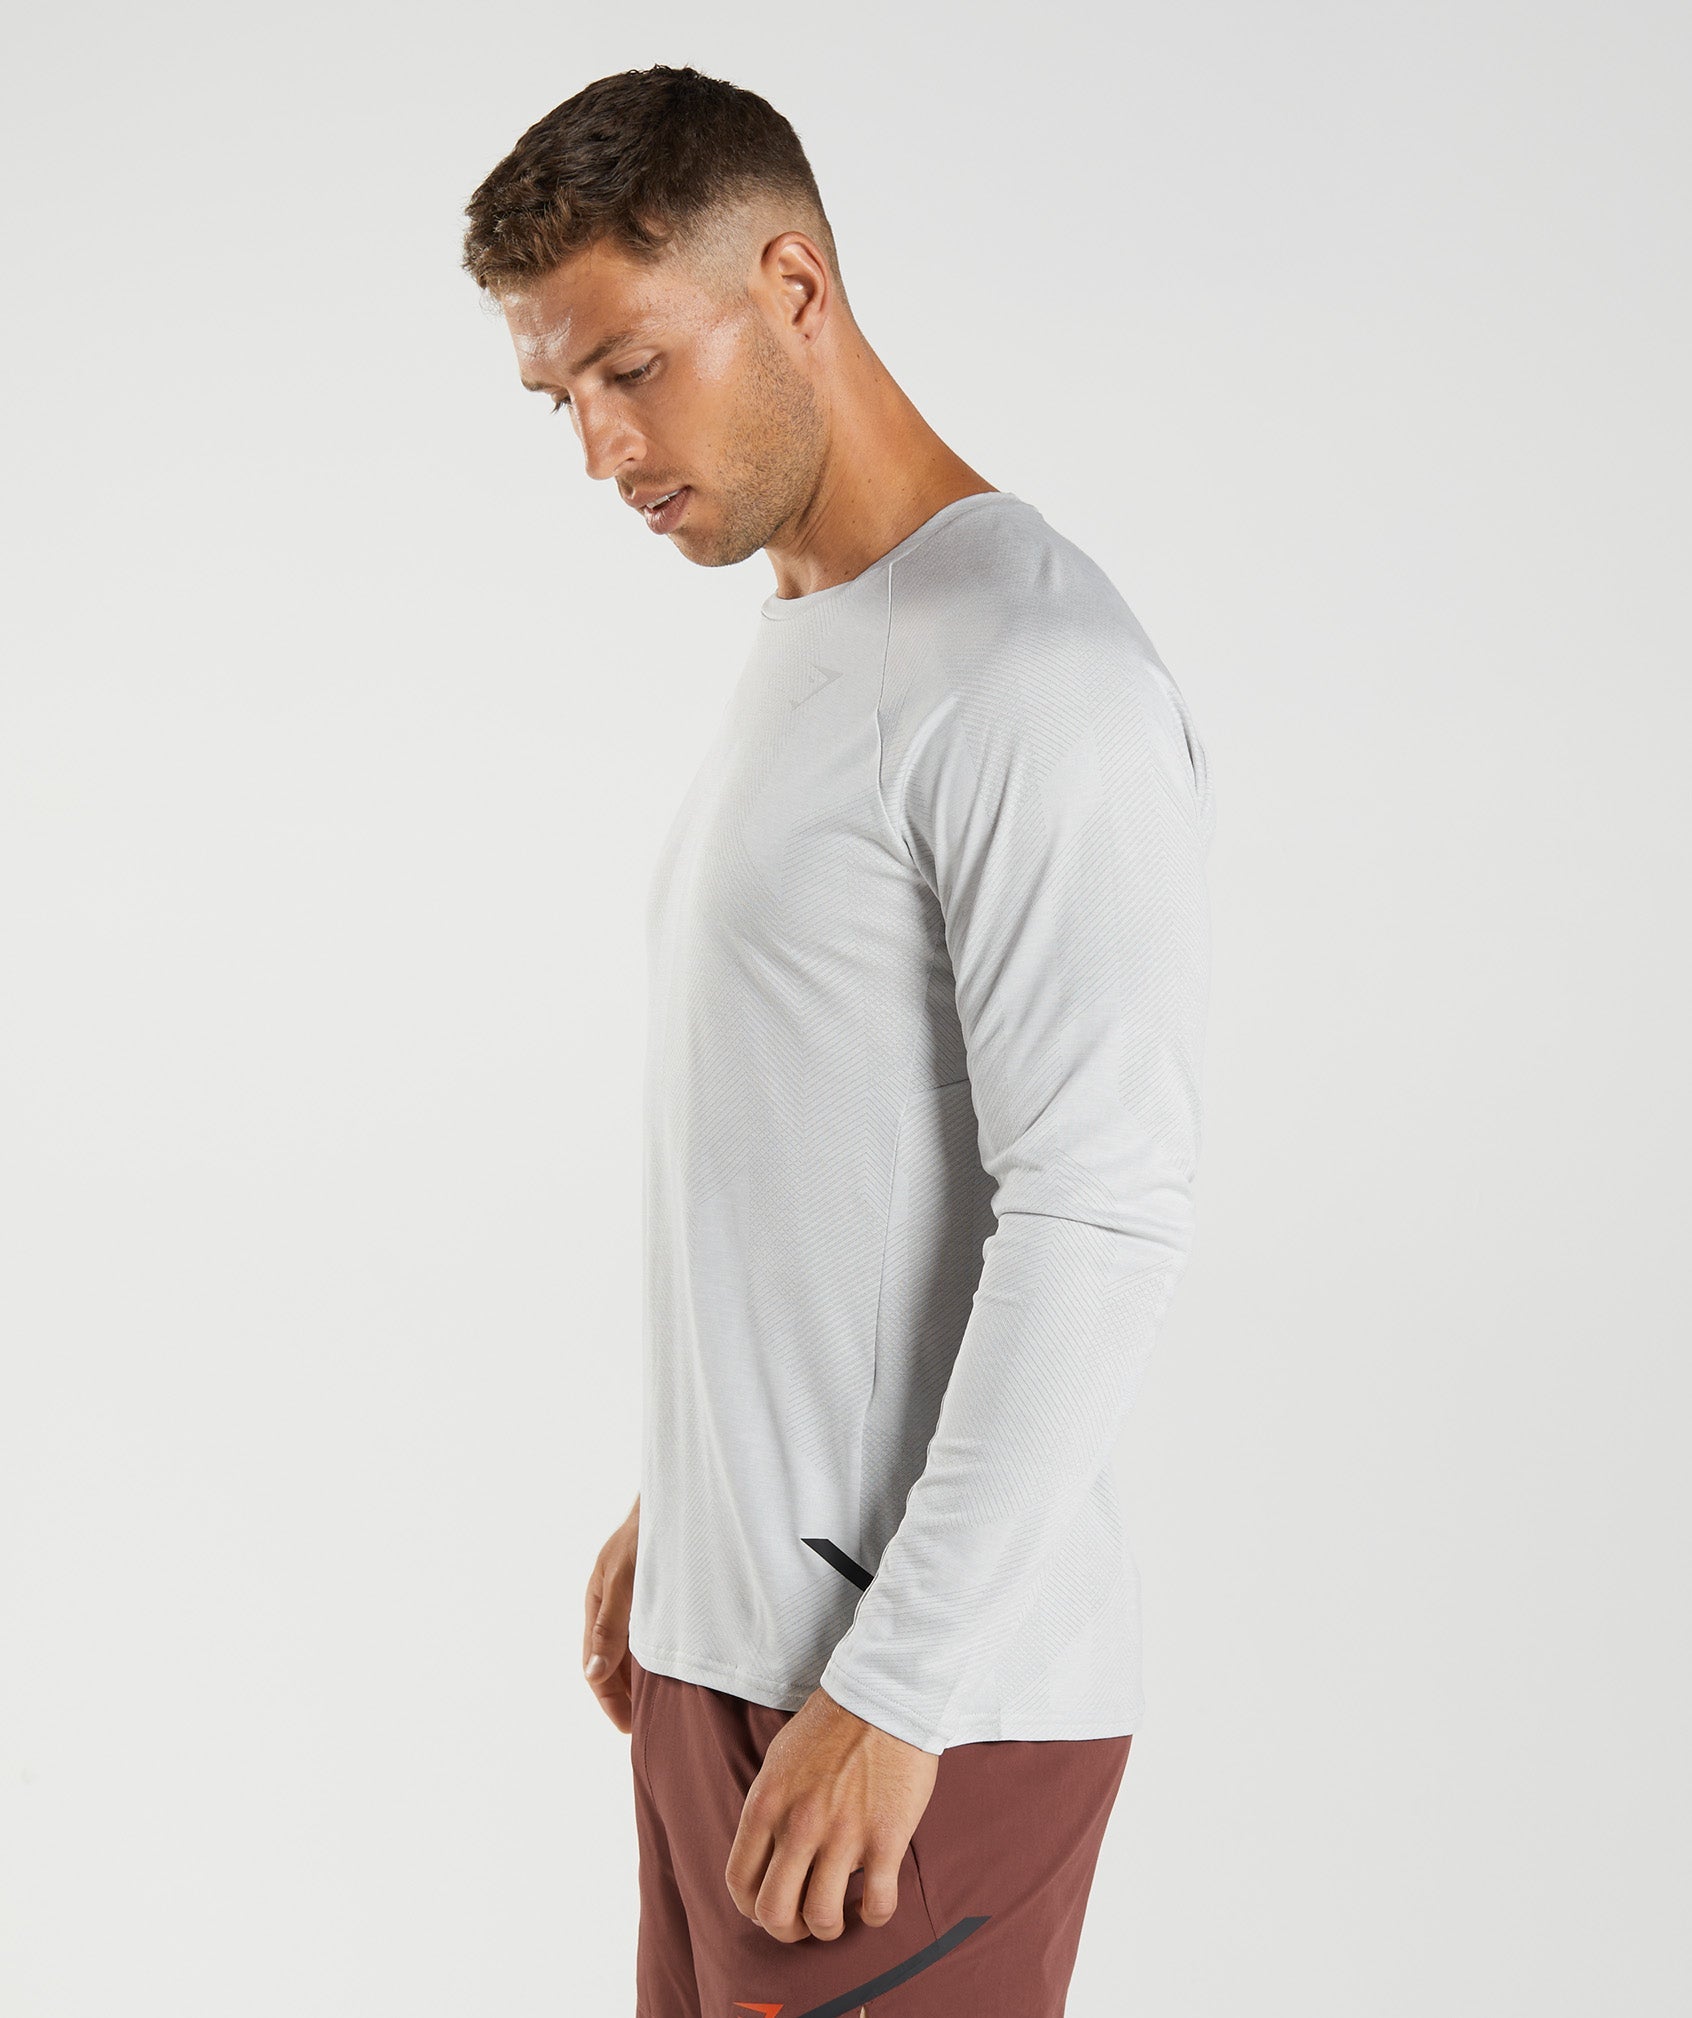 Apex Long Sleeve T-Shirt in Light Grey/White - view 3